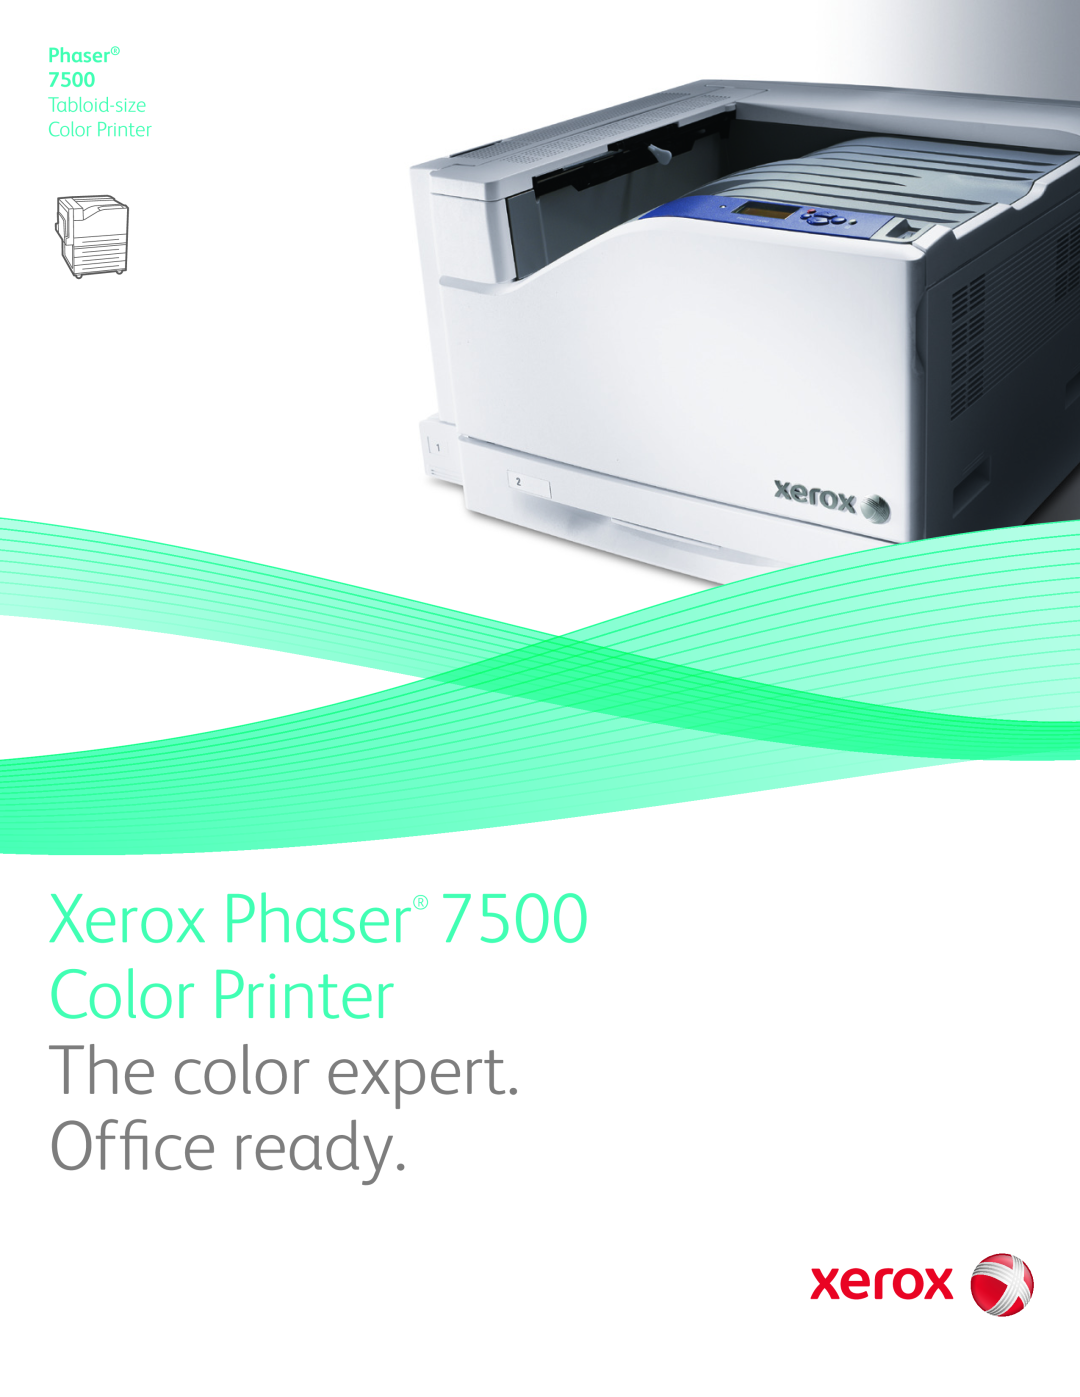 Xerox 7500DT, 7500DX manual Xerox Phaser 7500 Color Printer, The color expert. Office ready 